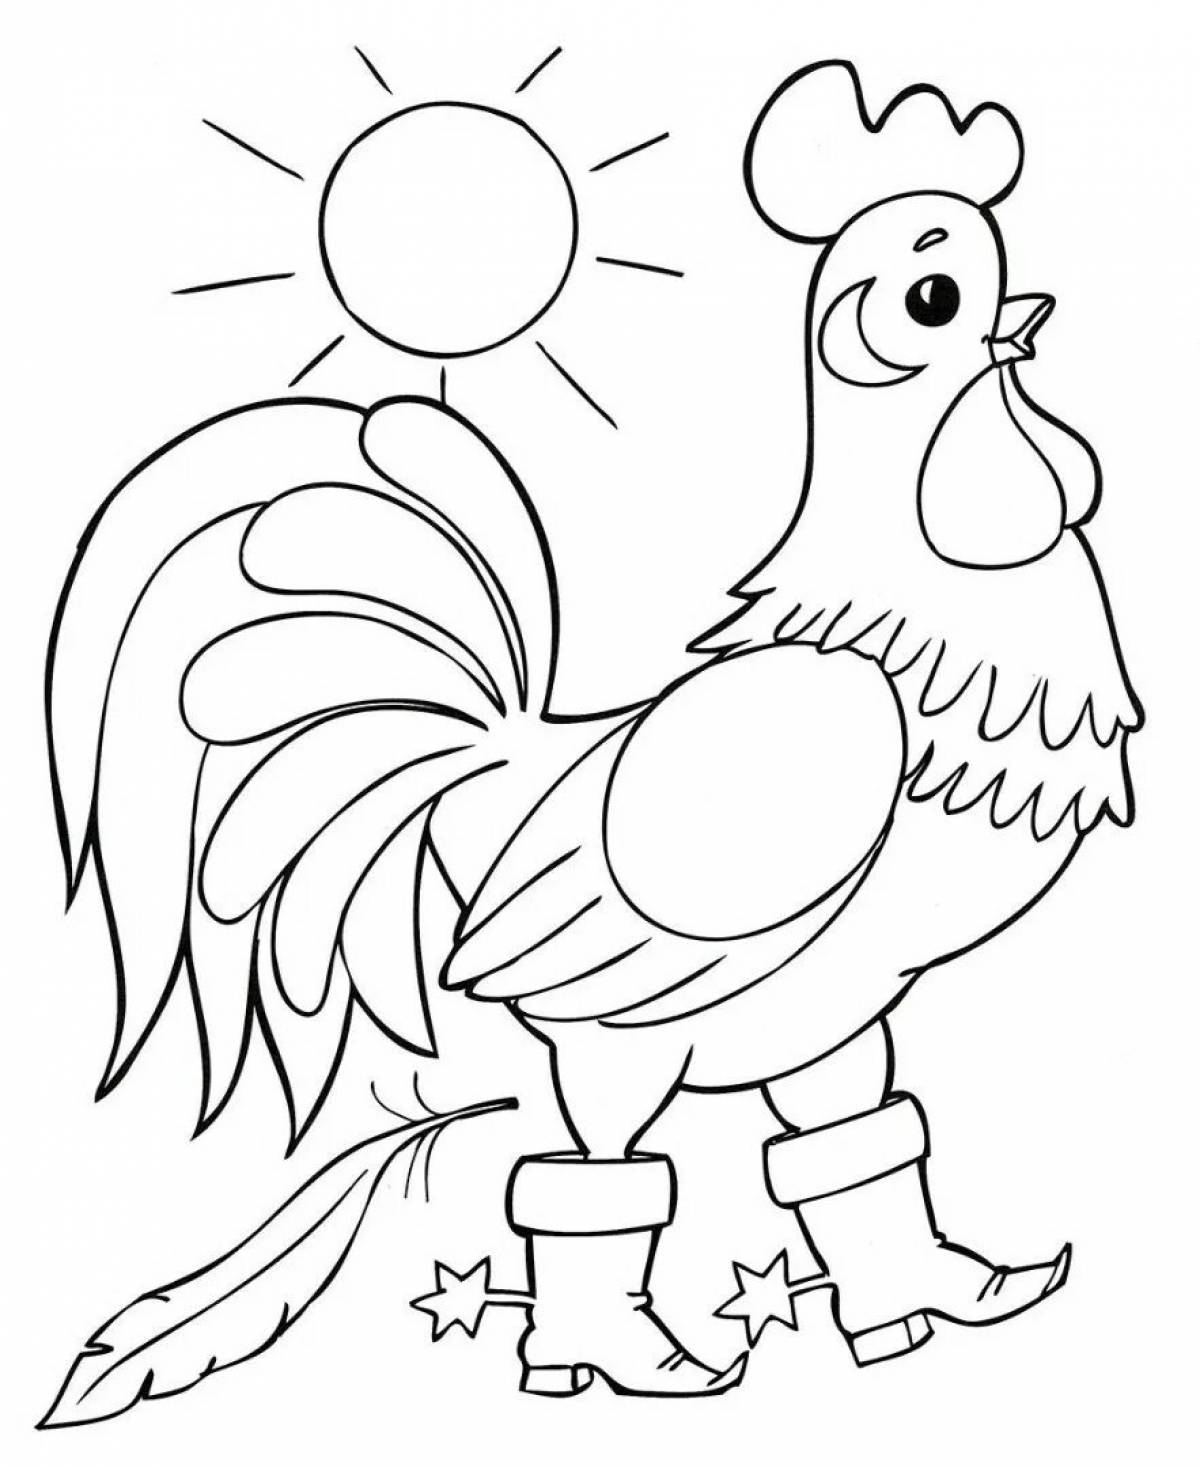 Colorful and lively drawing of a cockerel for children